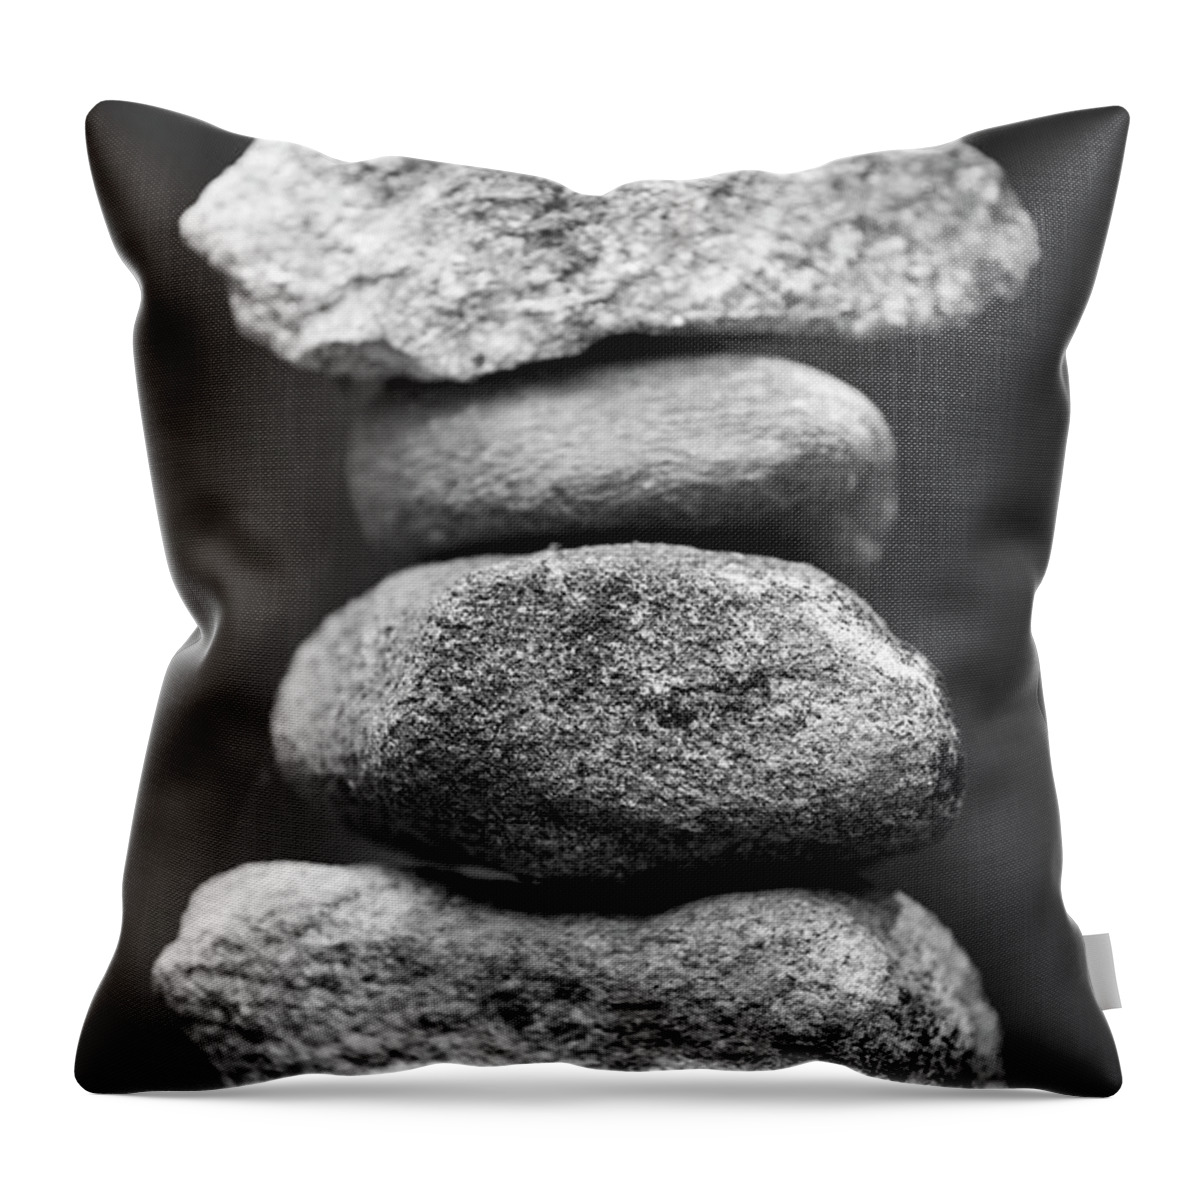 Outdoors Throw Pillow featuring the photograph Balanced Rocks, Close-up by Snap Decision